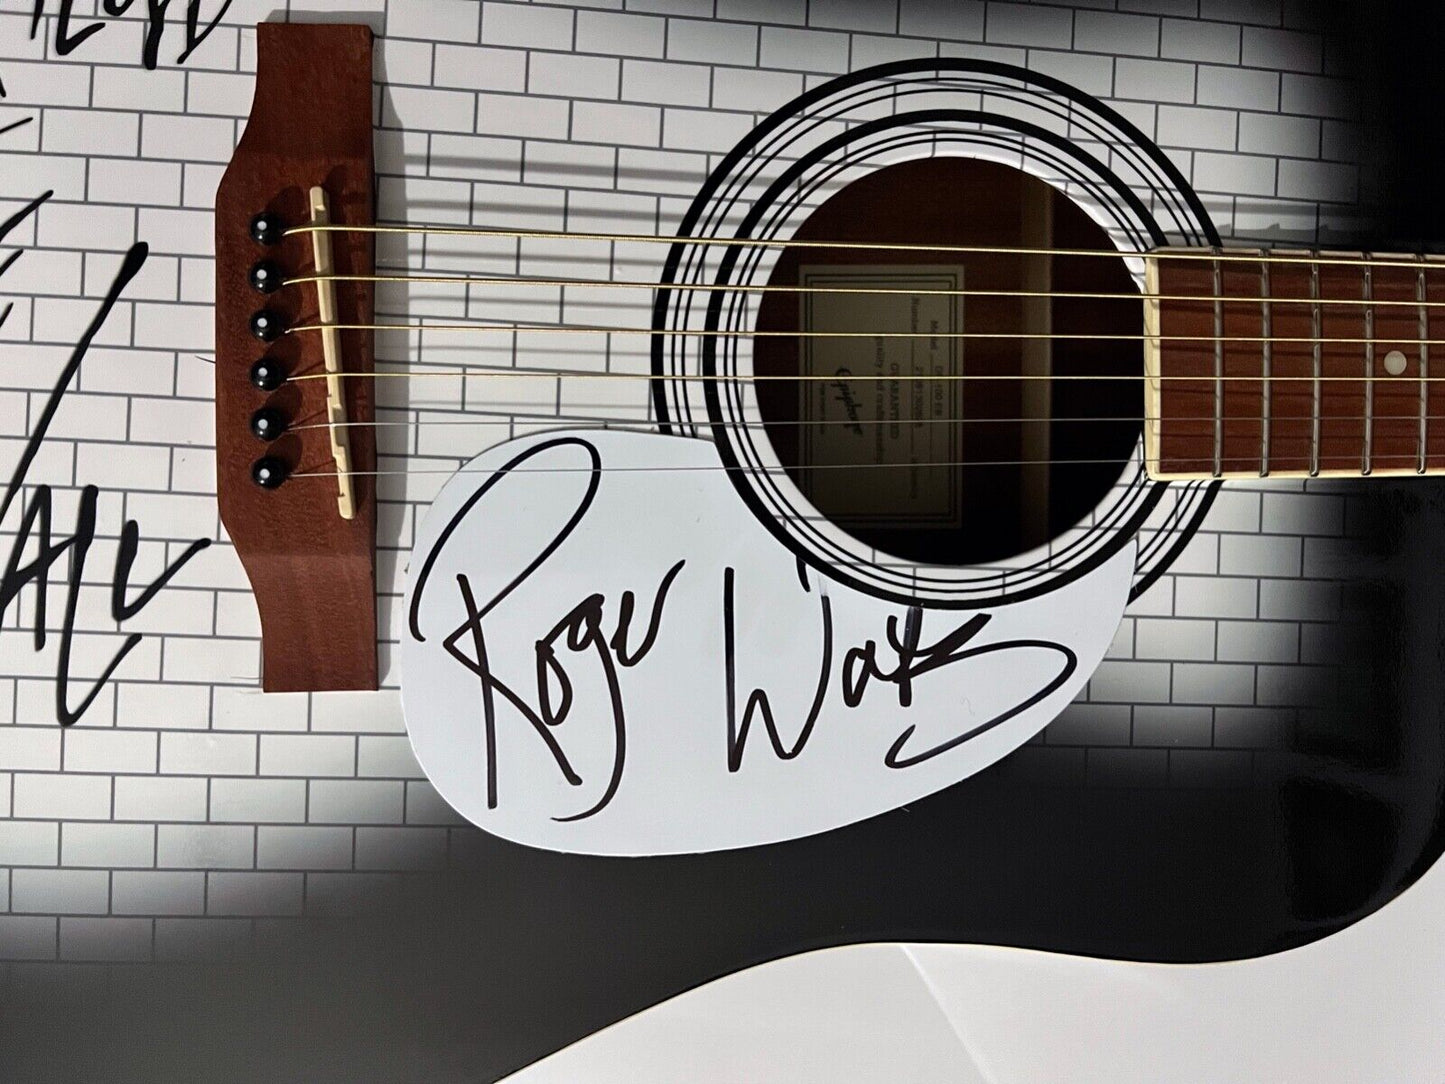 Roger Waters Pink Floyd Beckett JSA Autograph Signed Acoustic Epiphone guitar